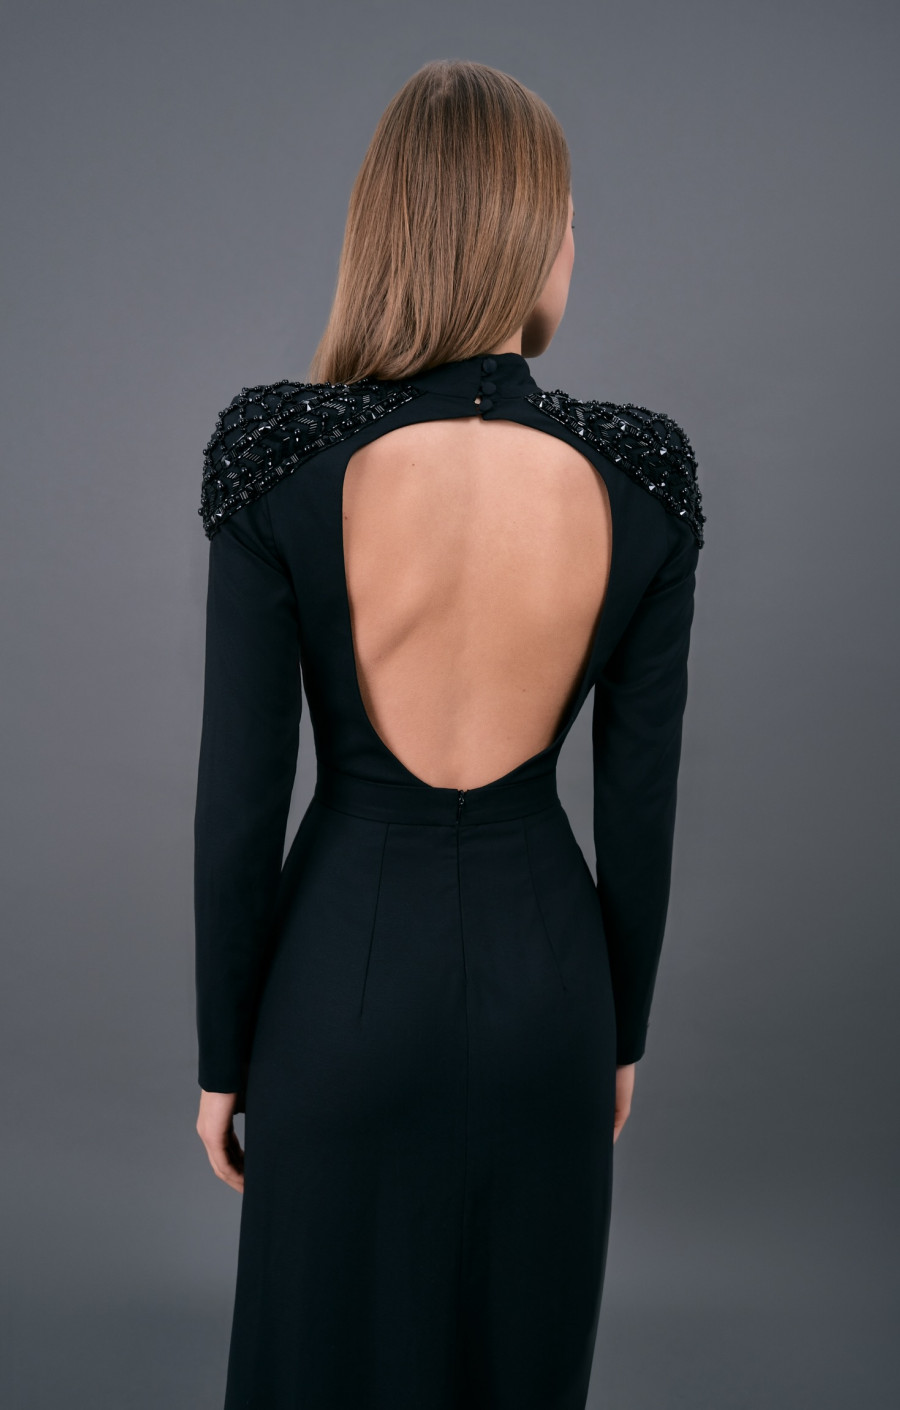 Black dress with an open back and embroidered shoulders